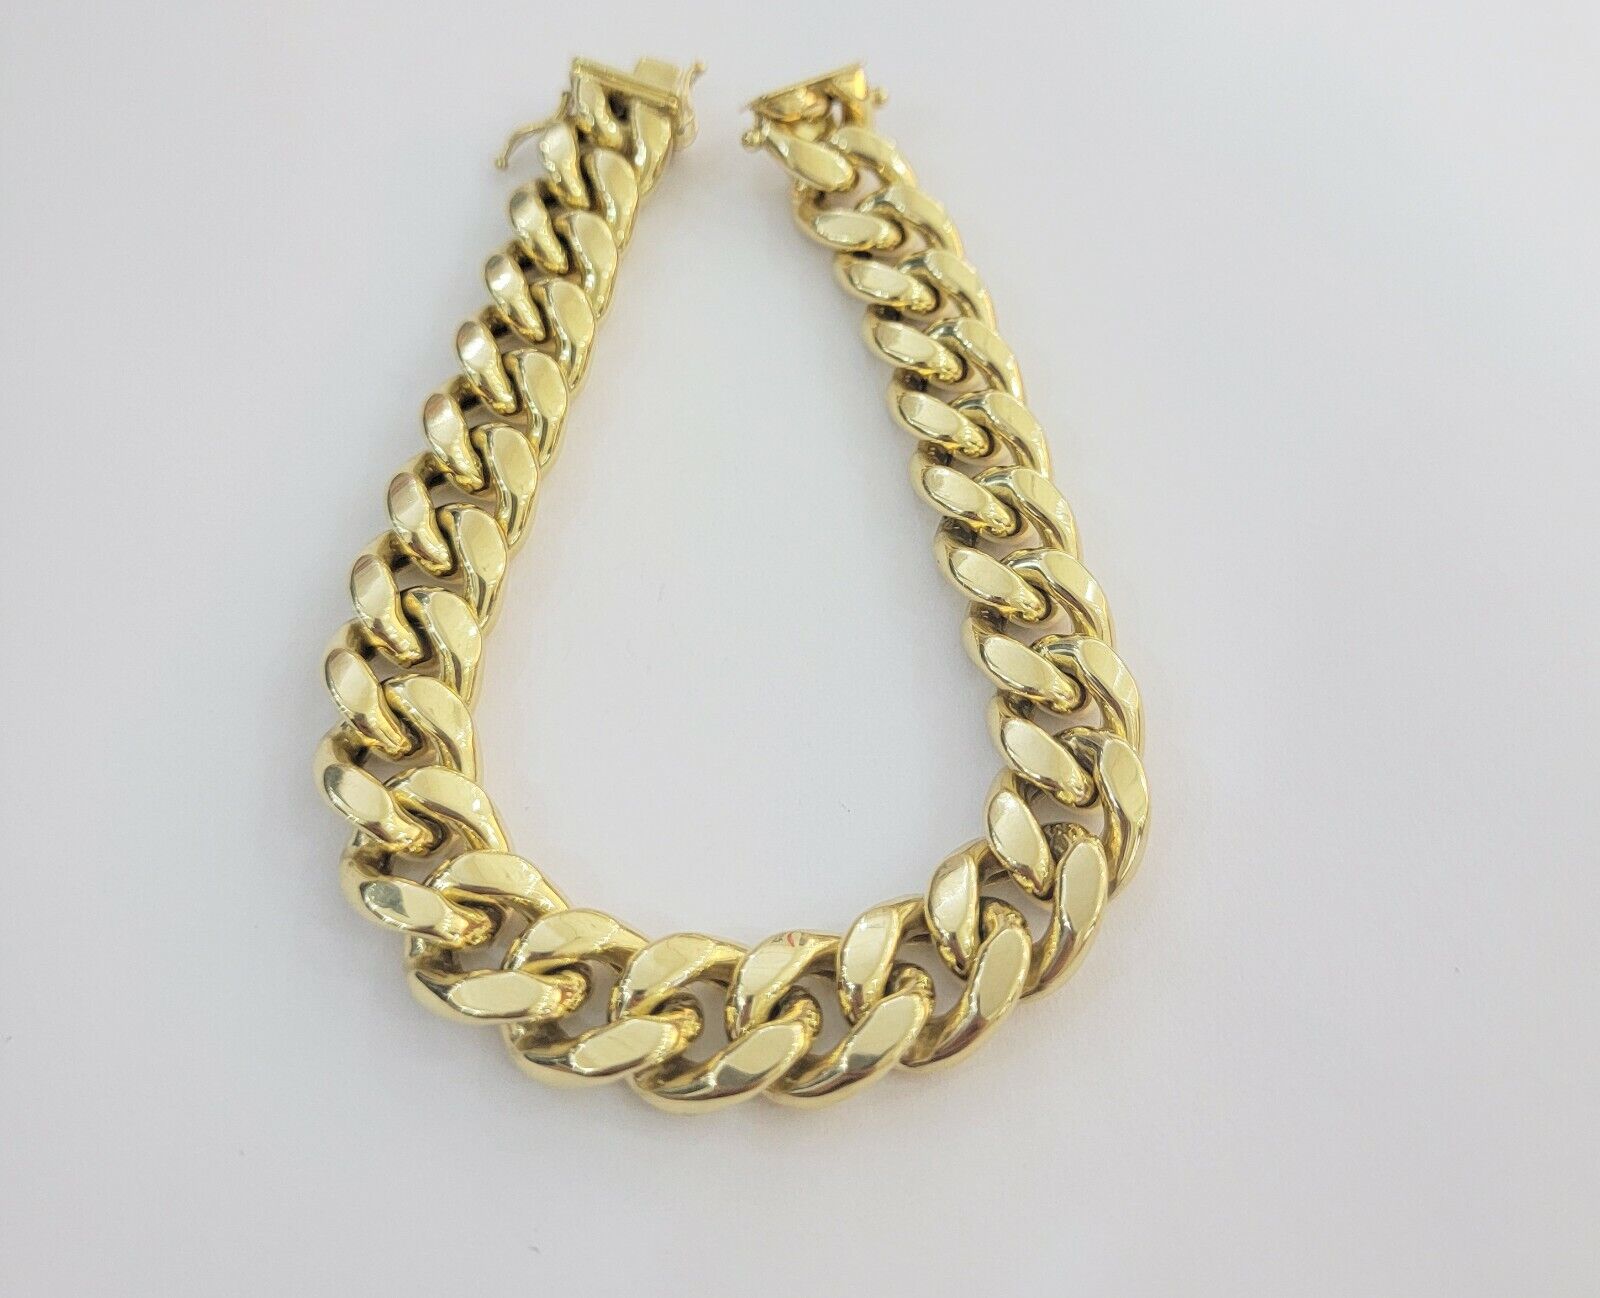 Real 10k Yellow Gold Bracelet 13mm 8 Inch Miami Cuban Link Mens 10KT Strong Link